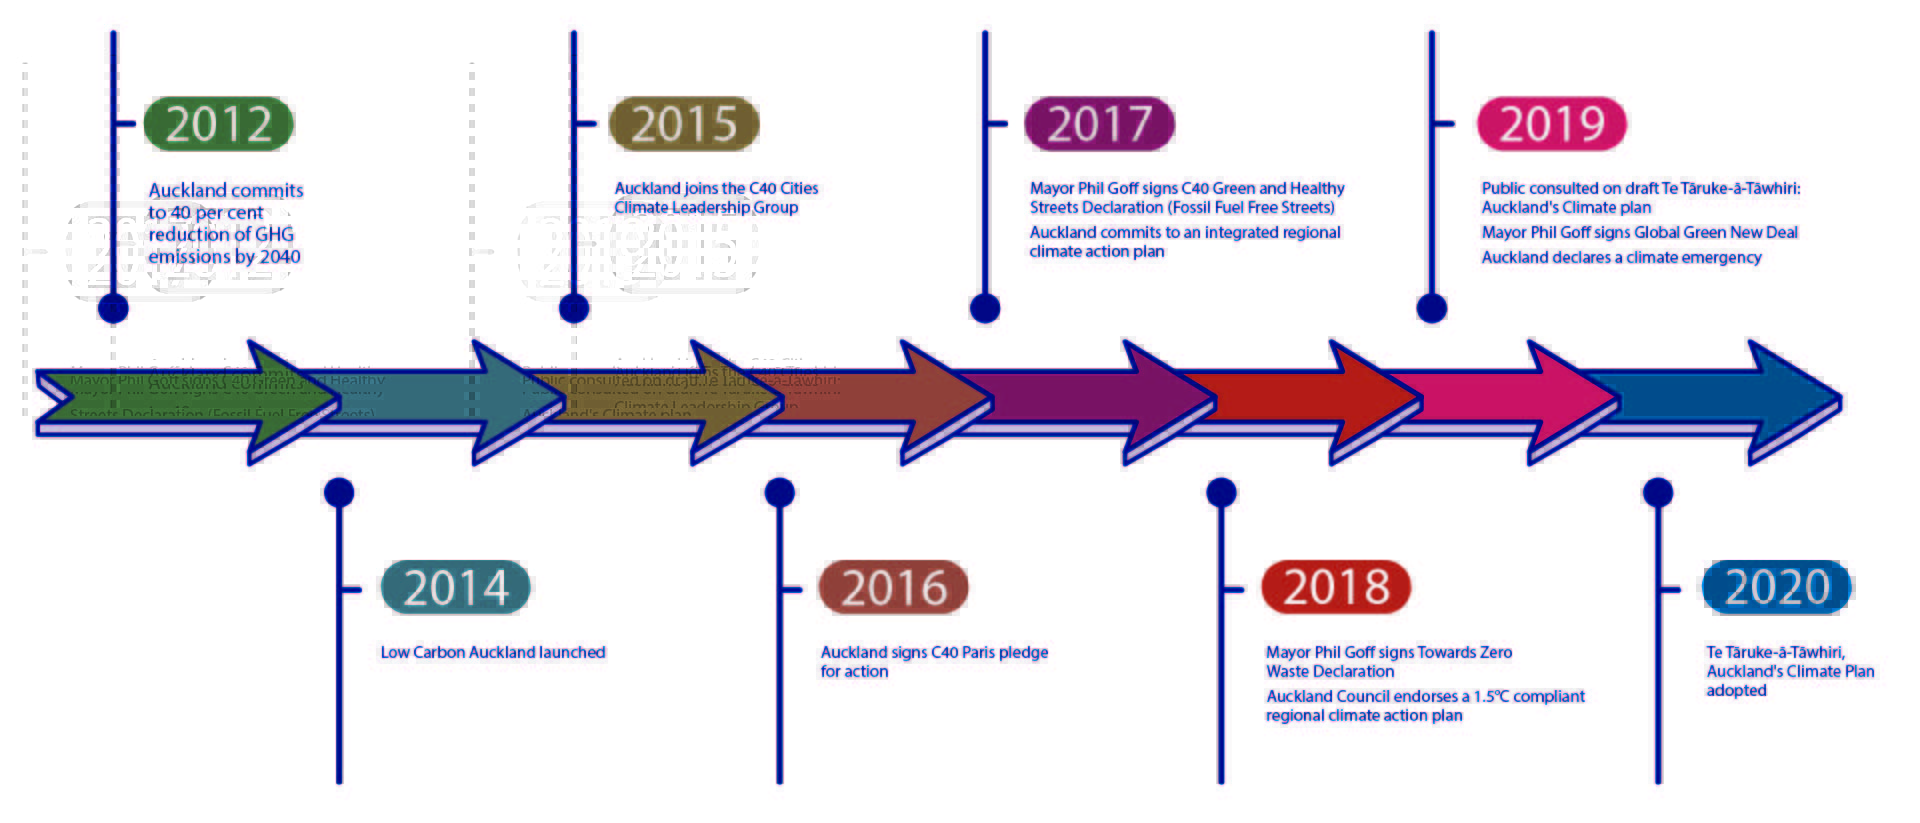 A timeline of Auckland commitments on climate change from 2012 to 2020.